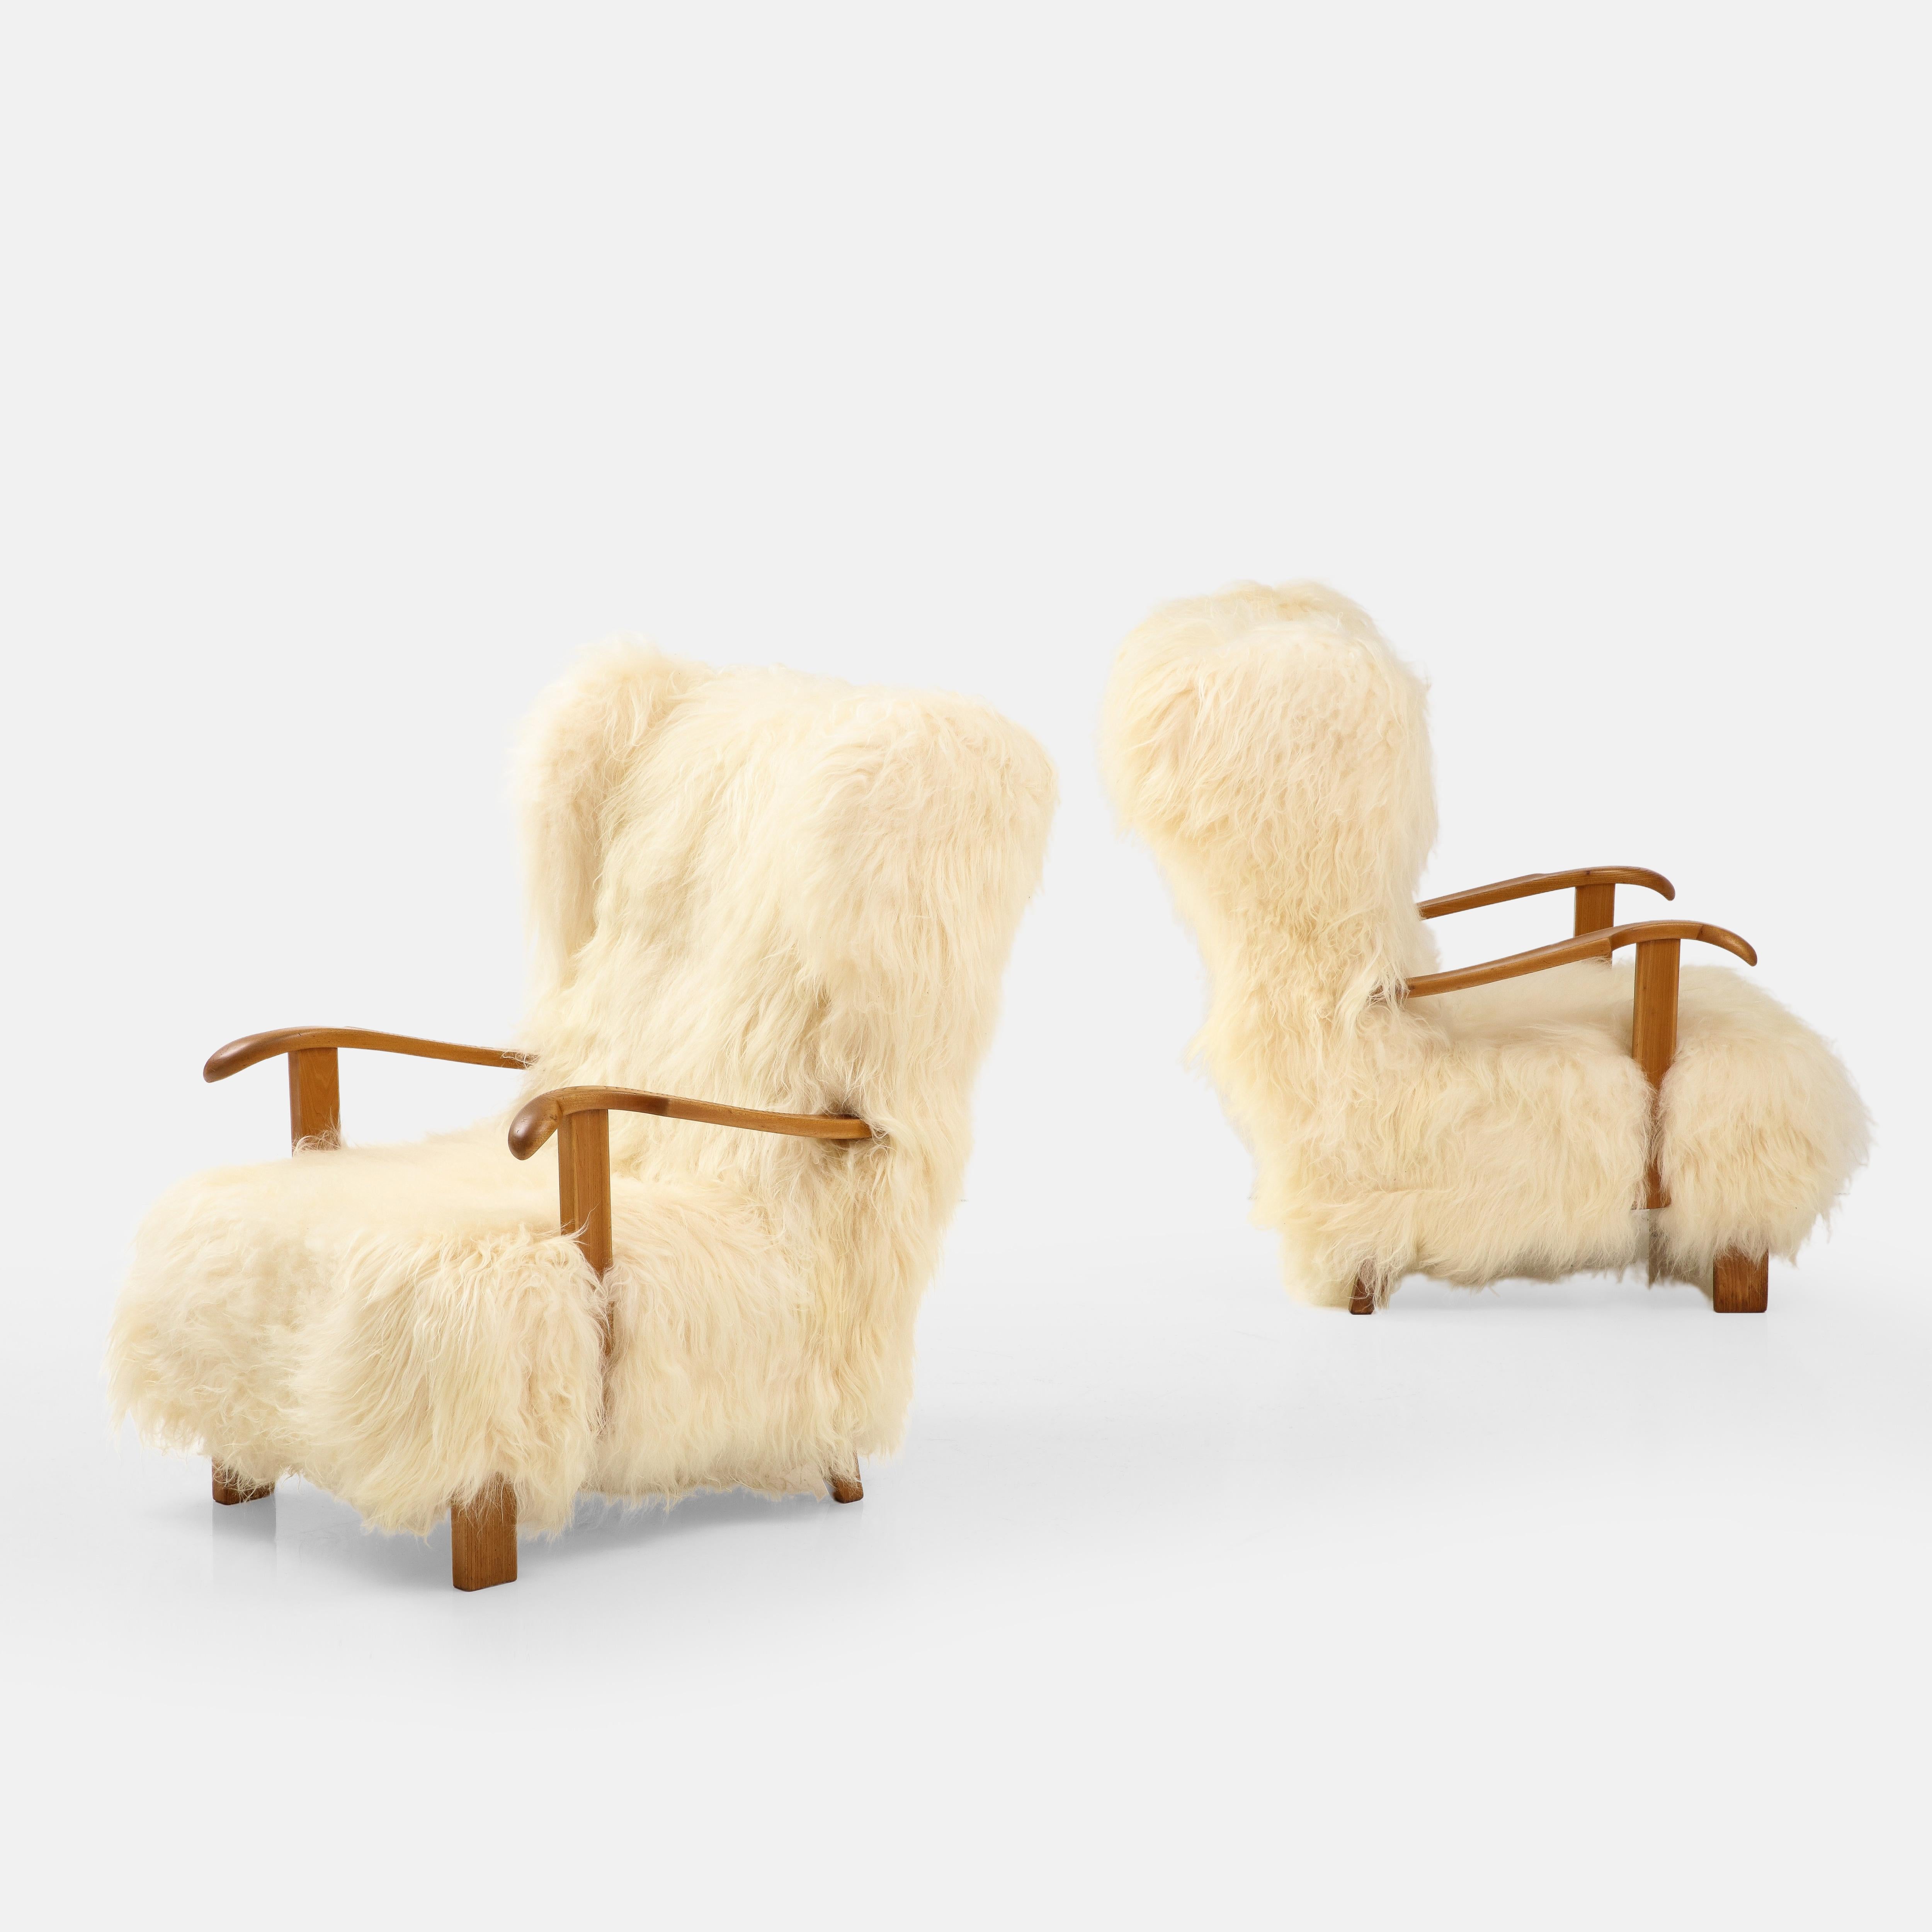 Danish Fritz Hansen Rare Pair of Wingback Lounge Chairs Model 1582 in Sheepskin, 1930s For Sale